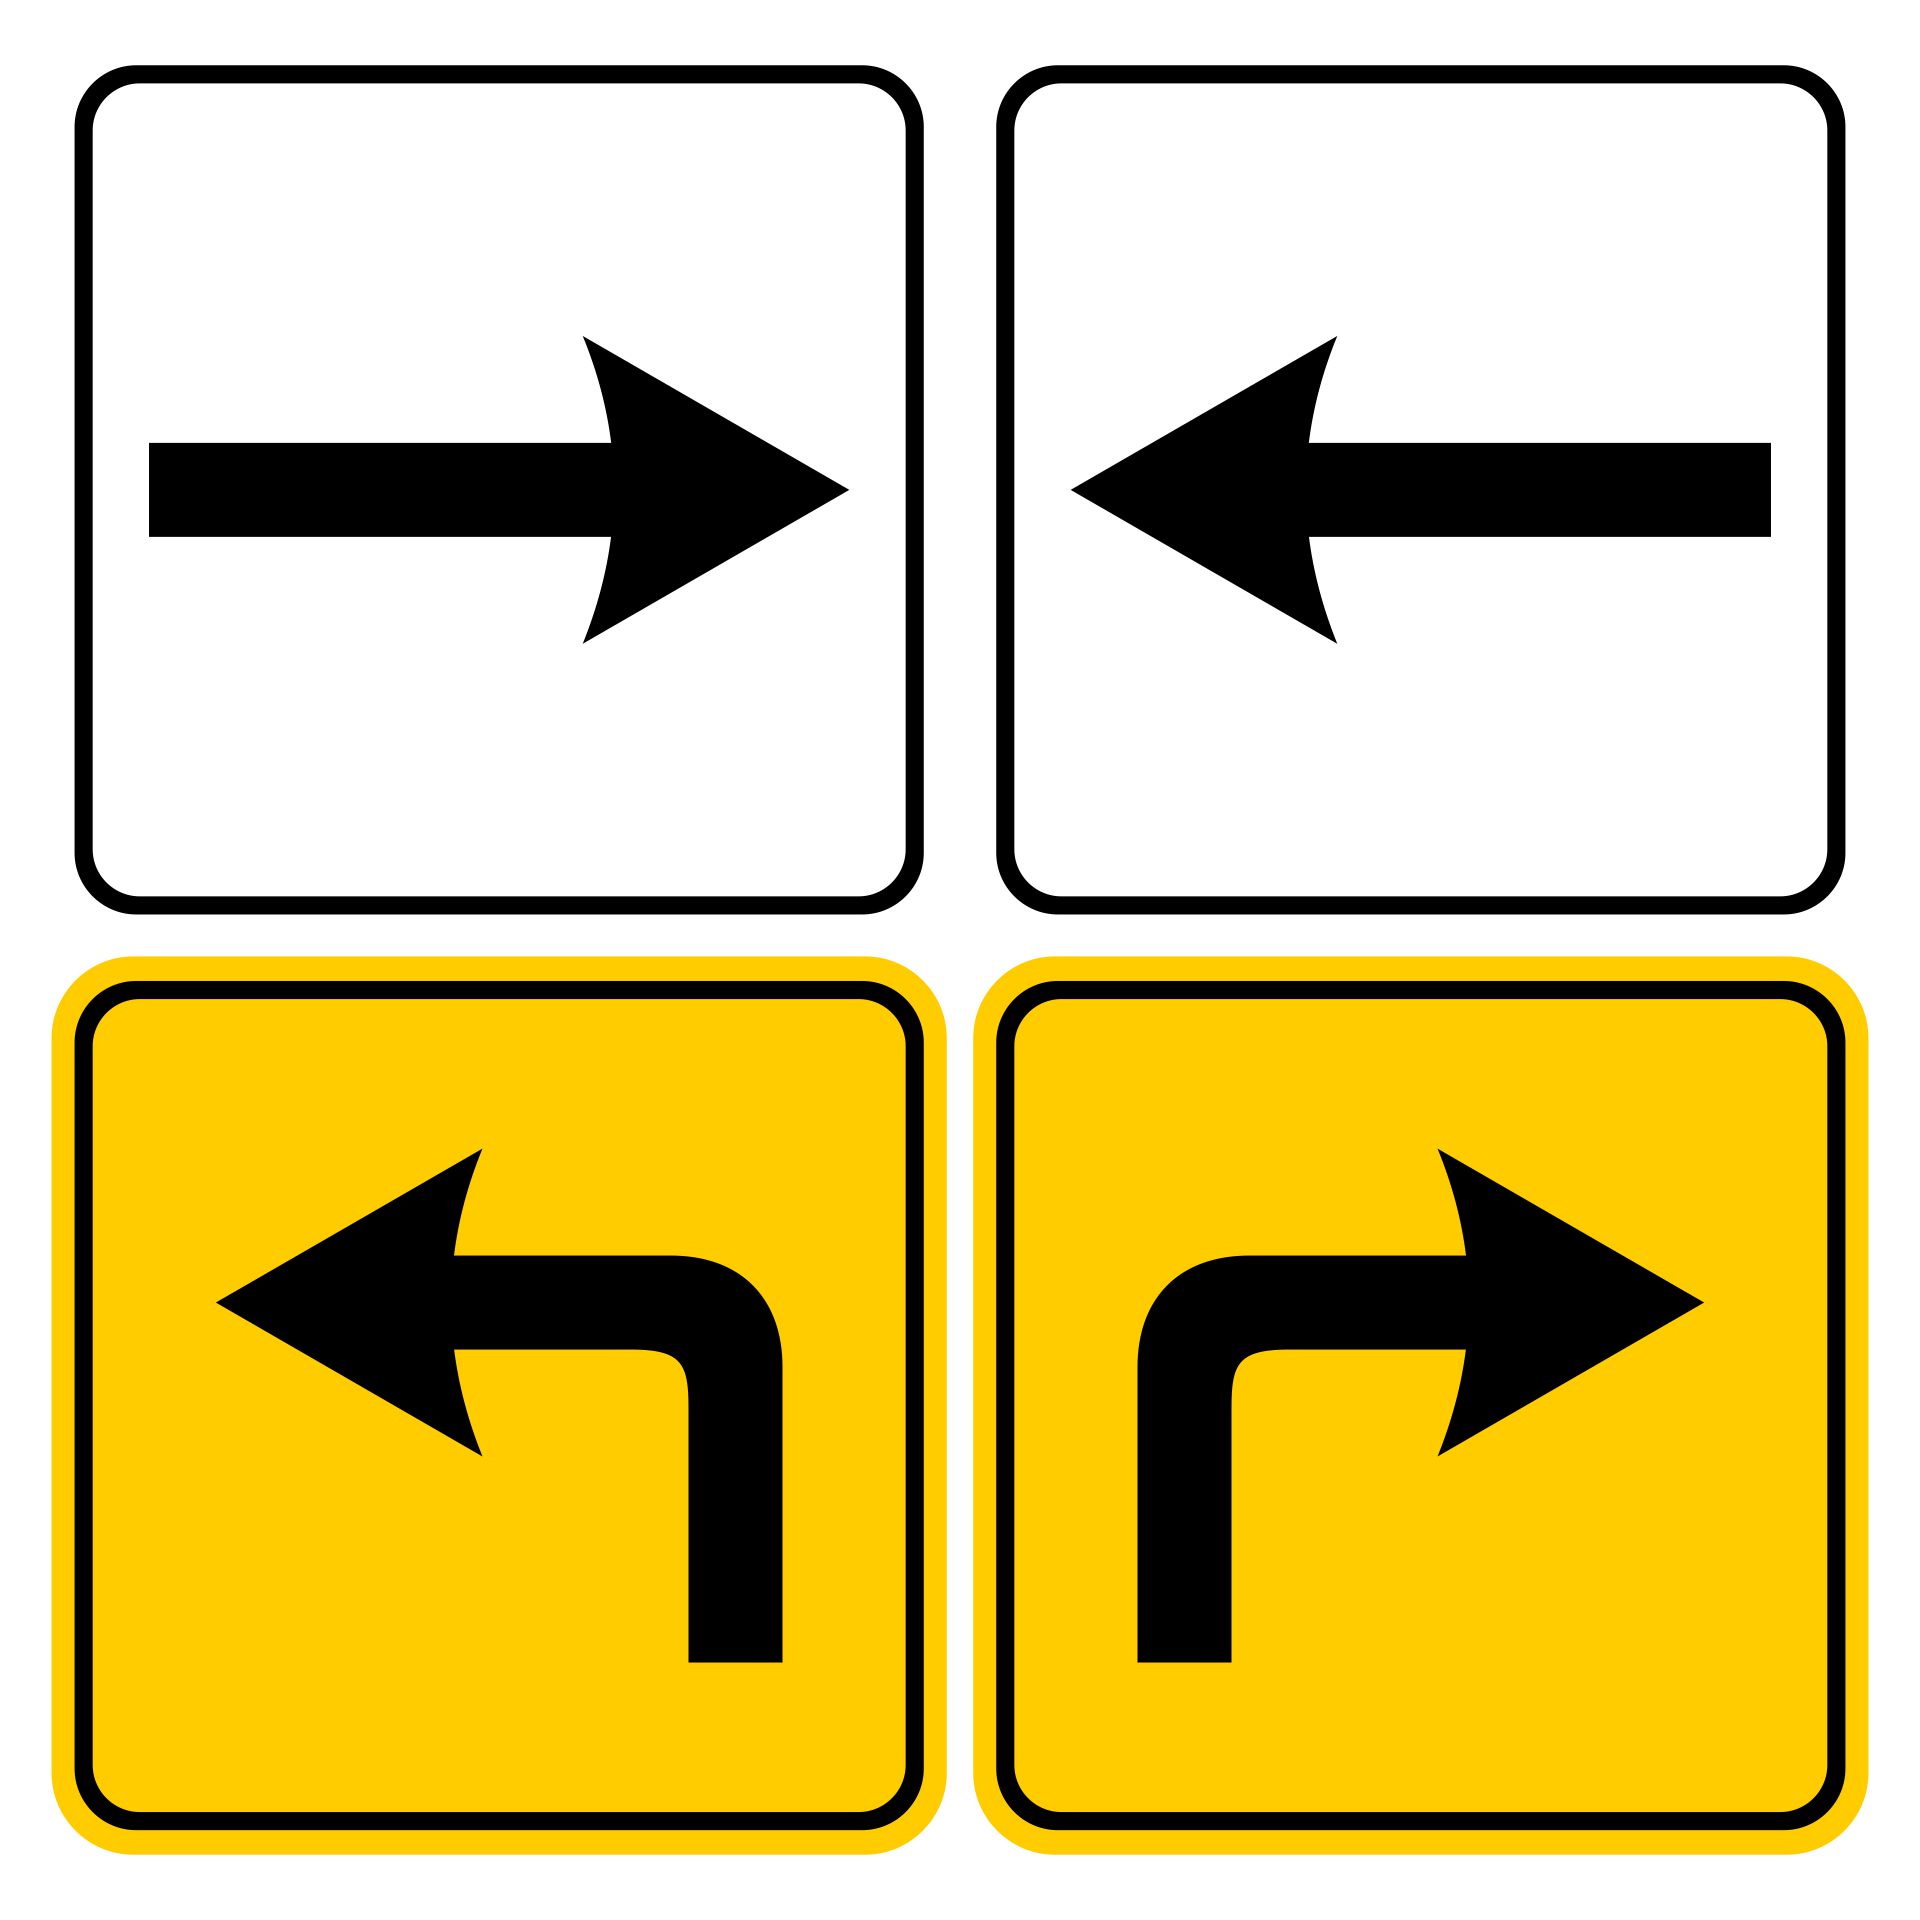 directional signs with arrows